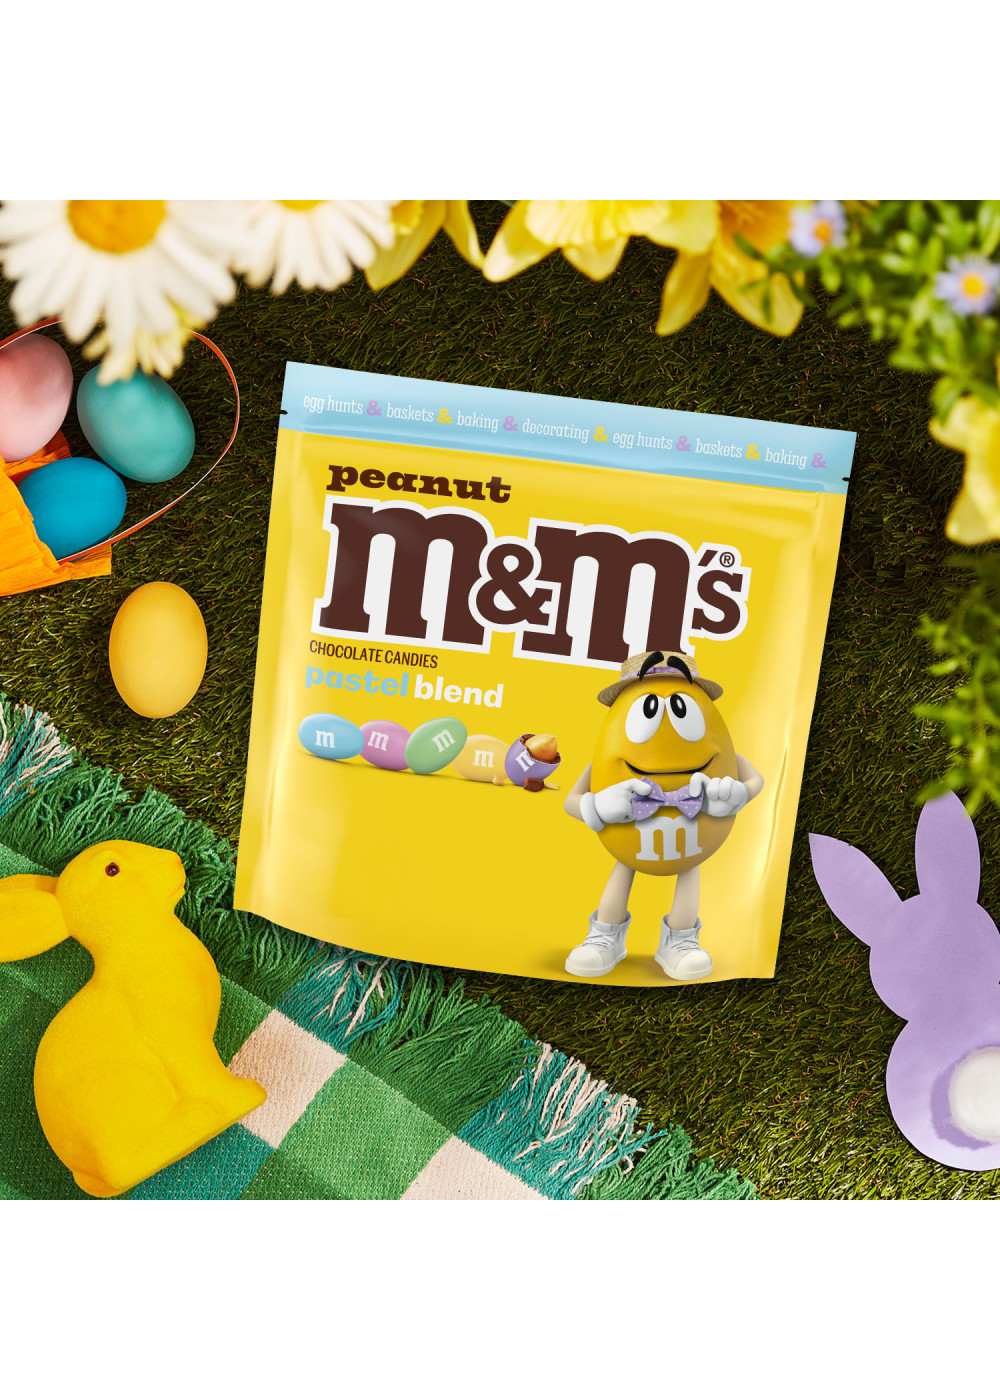 M&M'S White Chocolate Marshmallow Crispy Treat Pastel Easter Candy - Share  Size - Shop Candy at H-E-B